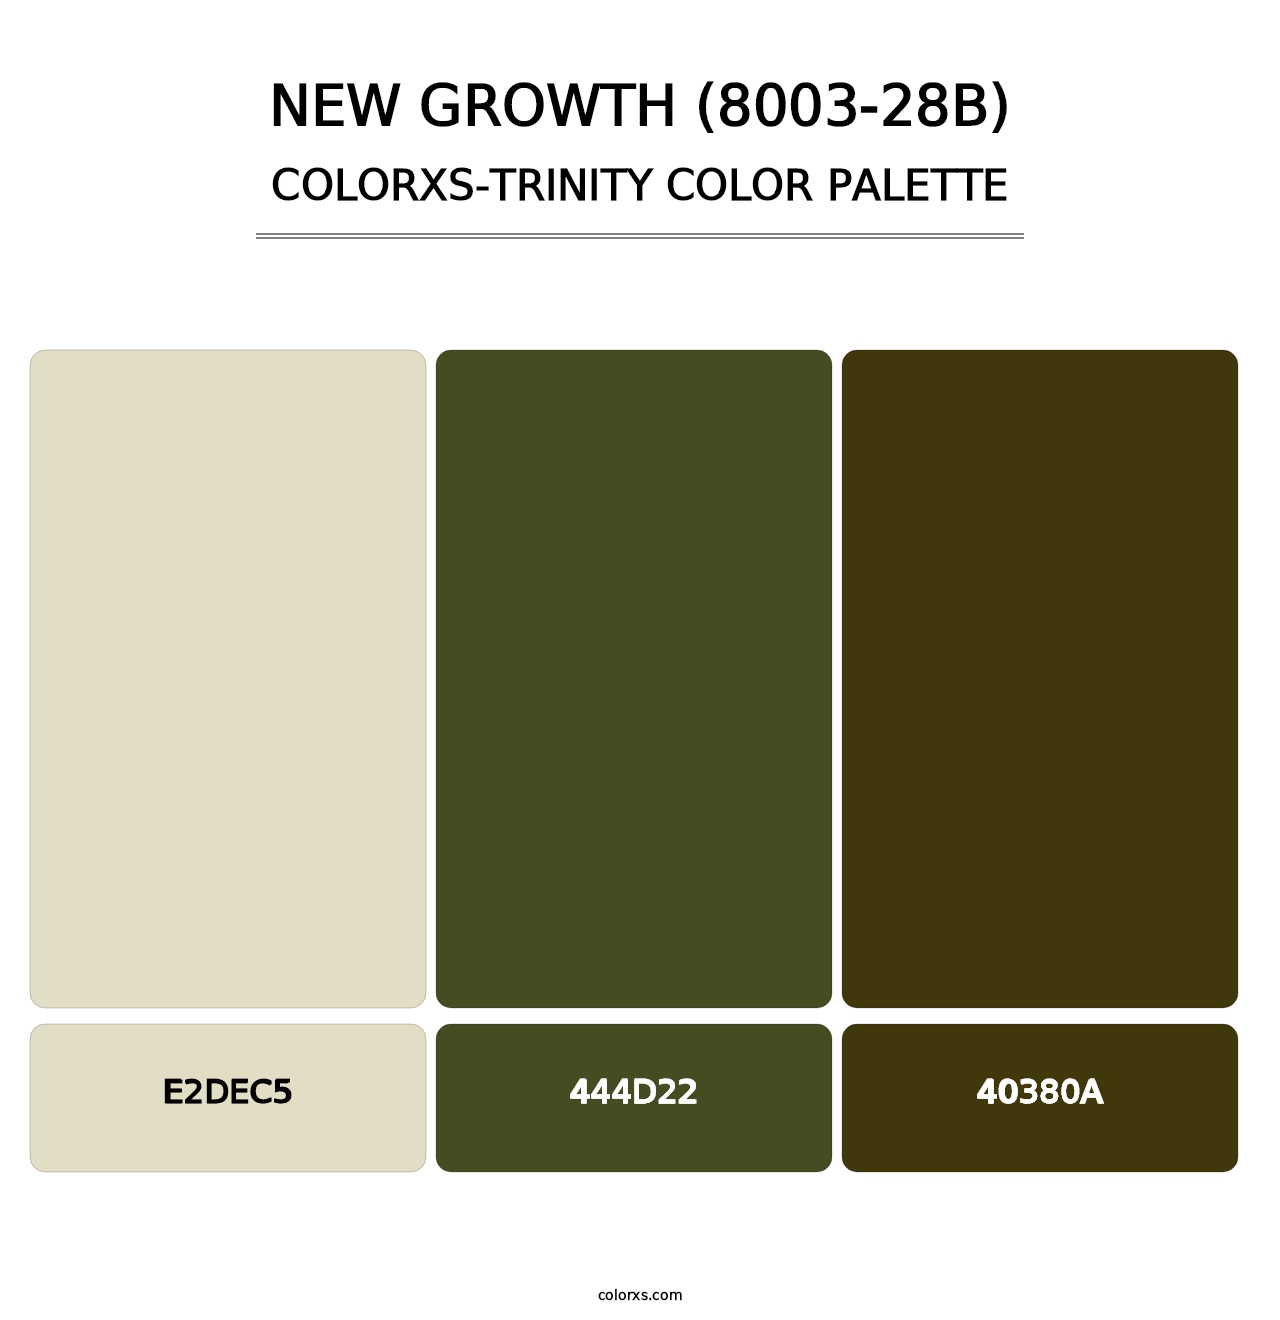 New Growth (8003-28B) - Colorxs Trinity Palette